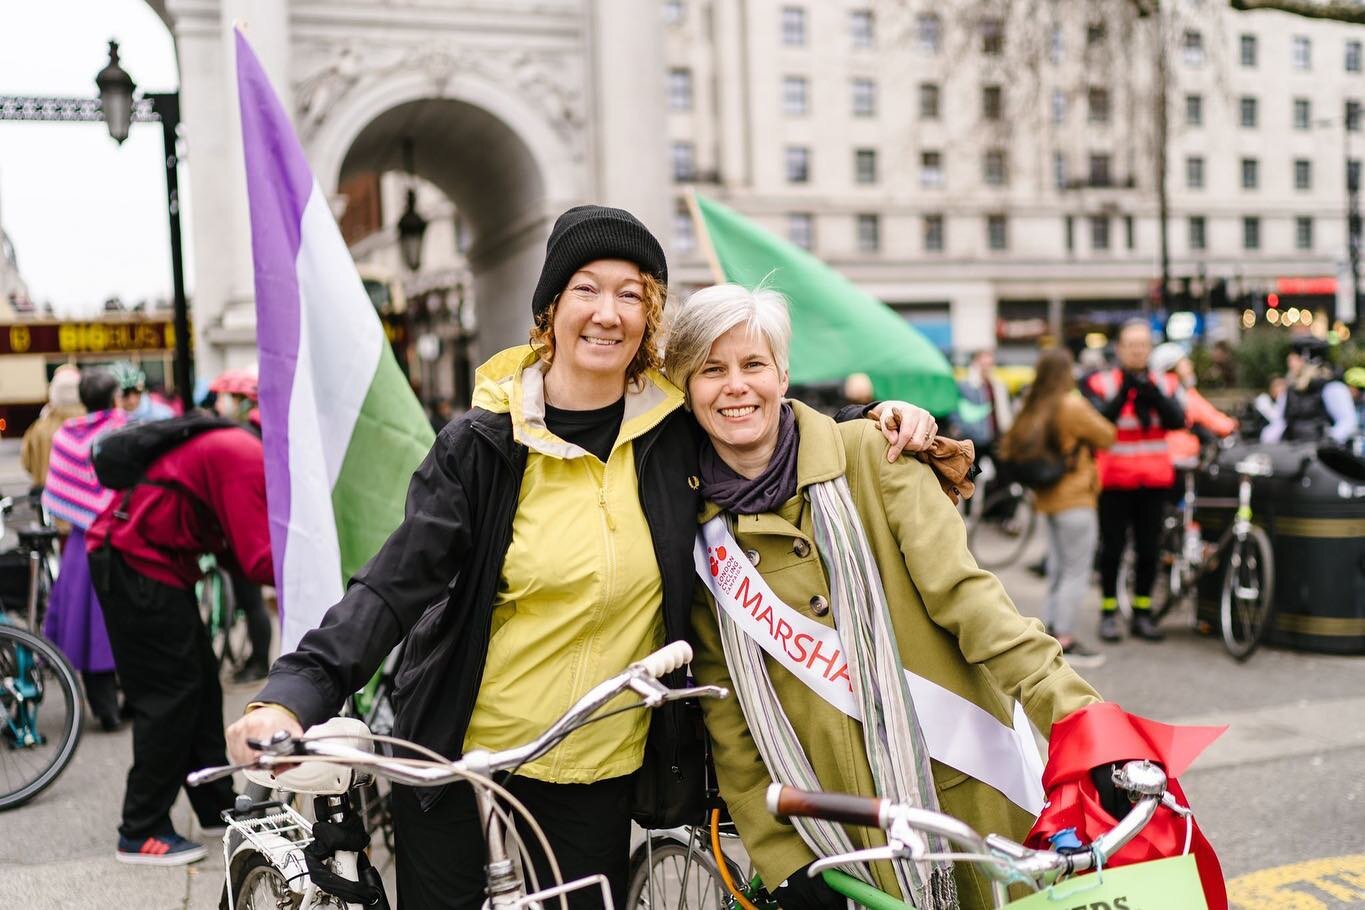 Freezing and Proud to be one of 700 cyclists, holding up traffic on a Sunday morning in Central London. We want more SAFE cycle routes so that we can ALL enjoy the ride - without being at risk of losing our legs, thank you. 
Here's me and lovely Rach